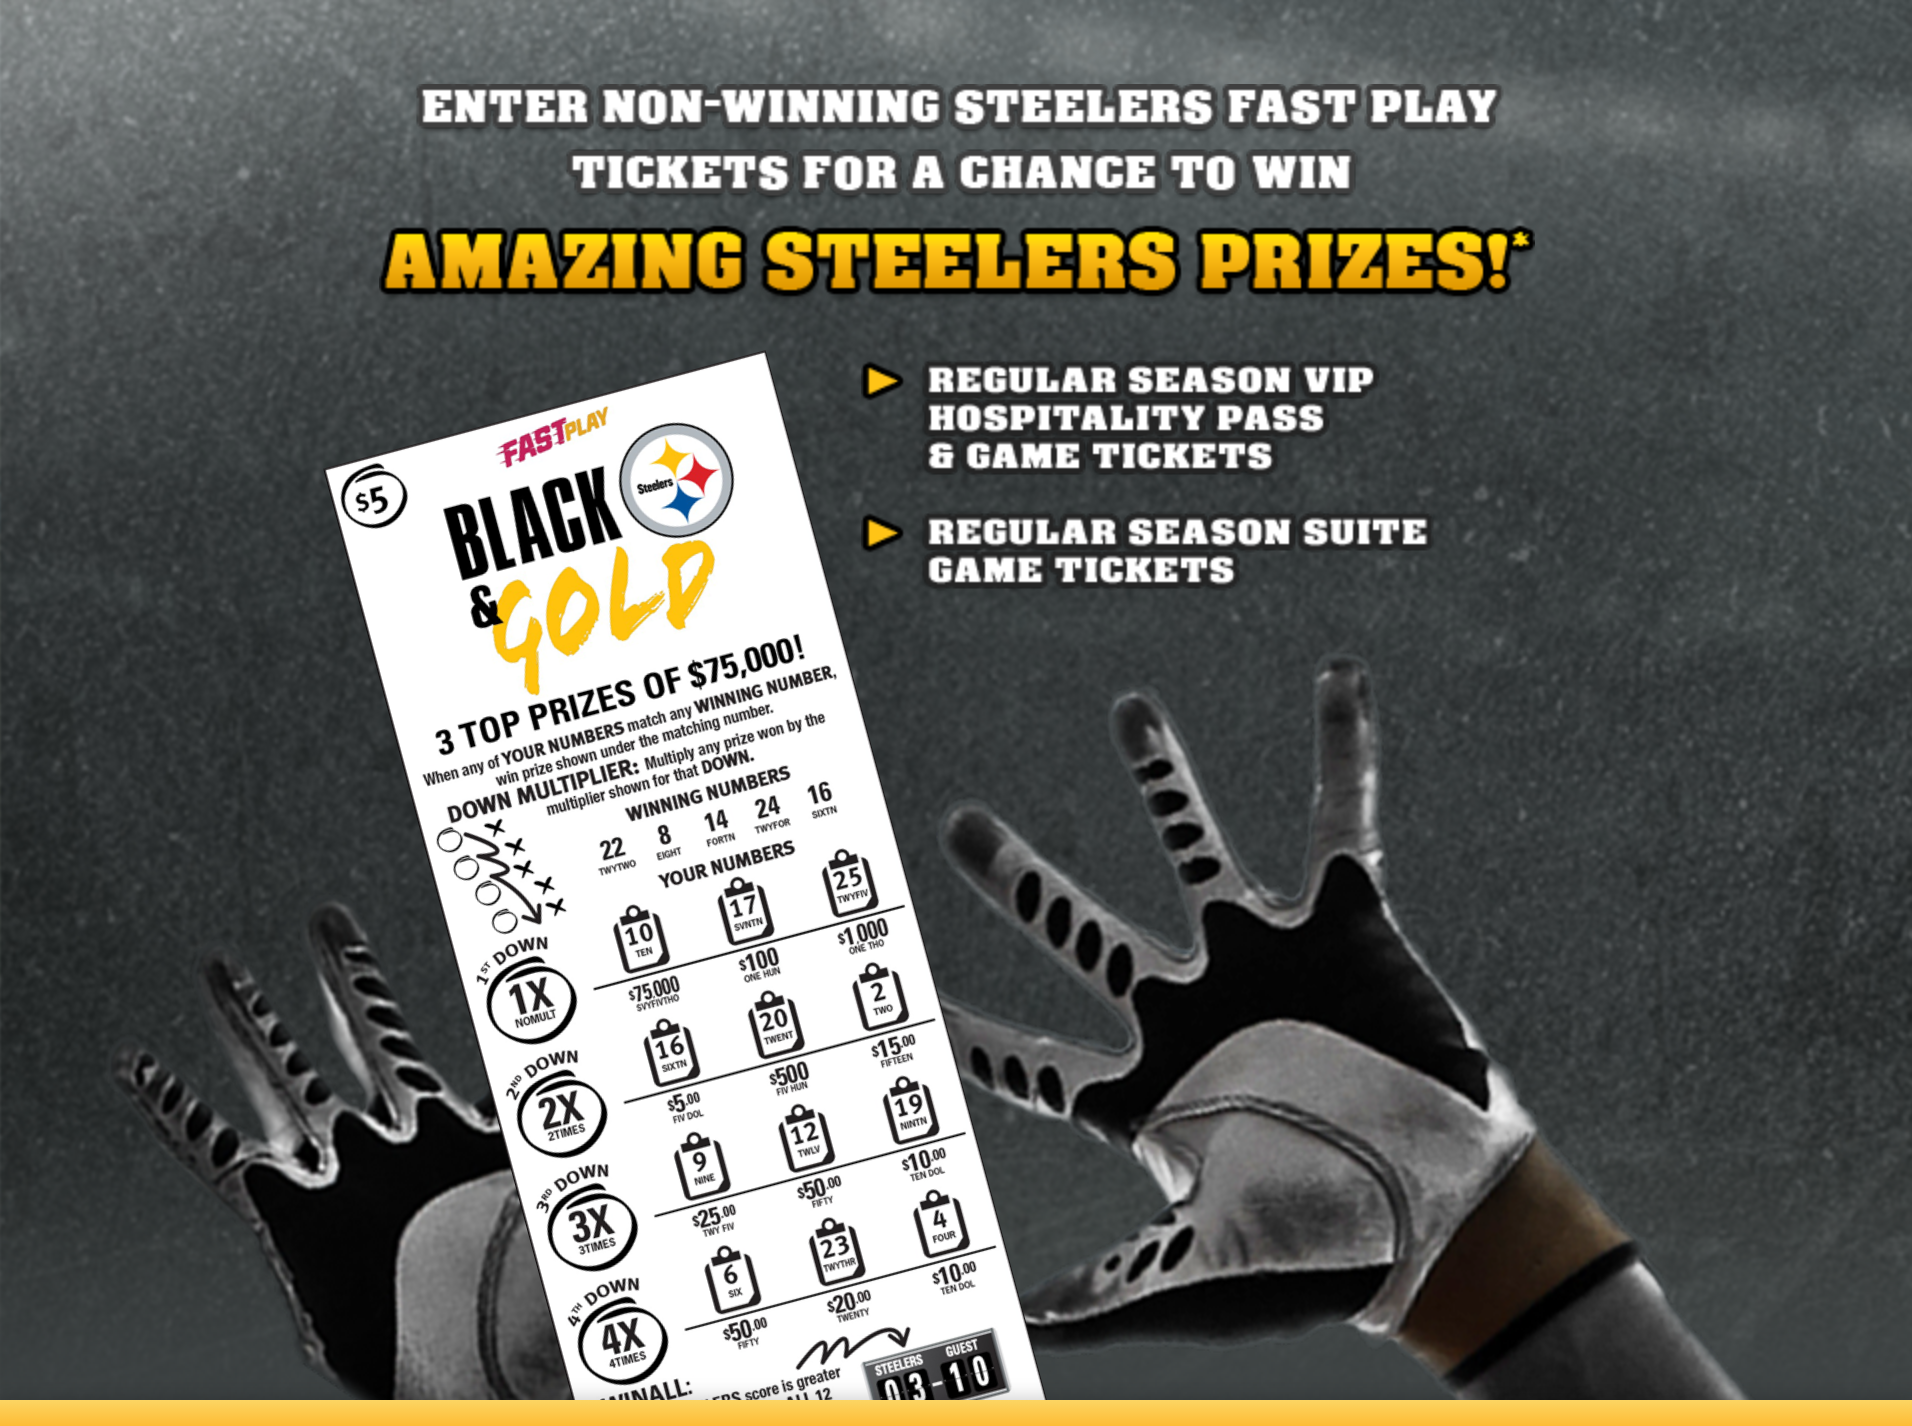 Enter non-winning steelers fast play tickets for a chance to win exciting steelers prizes!